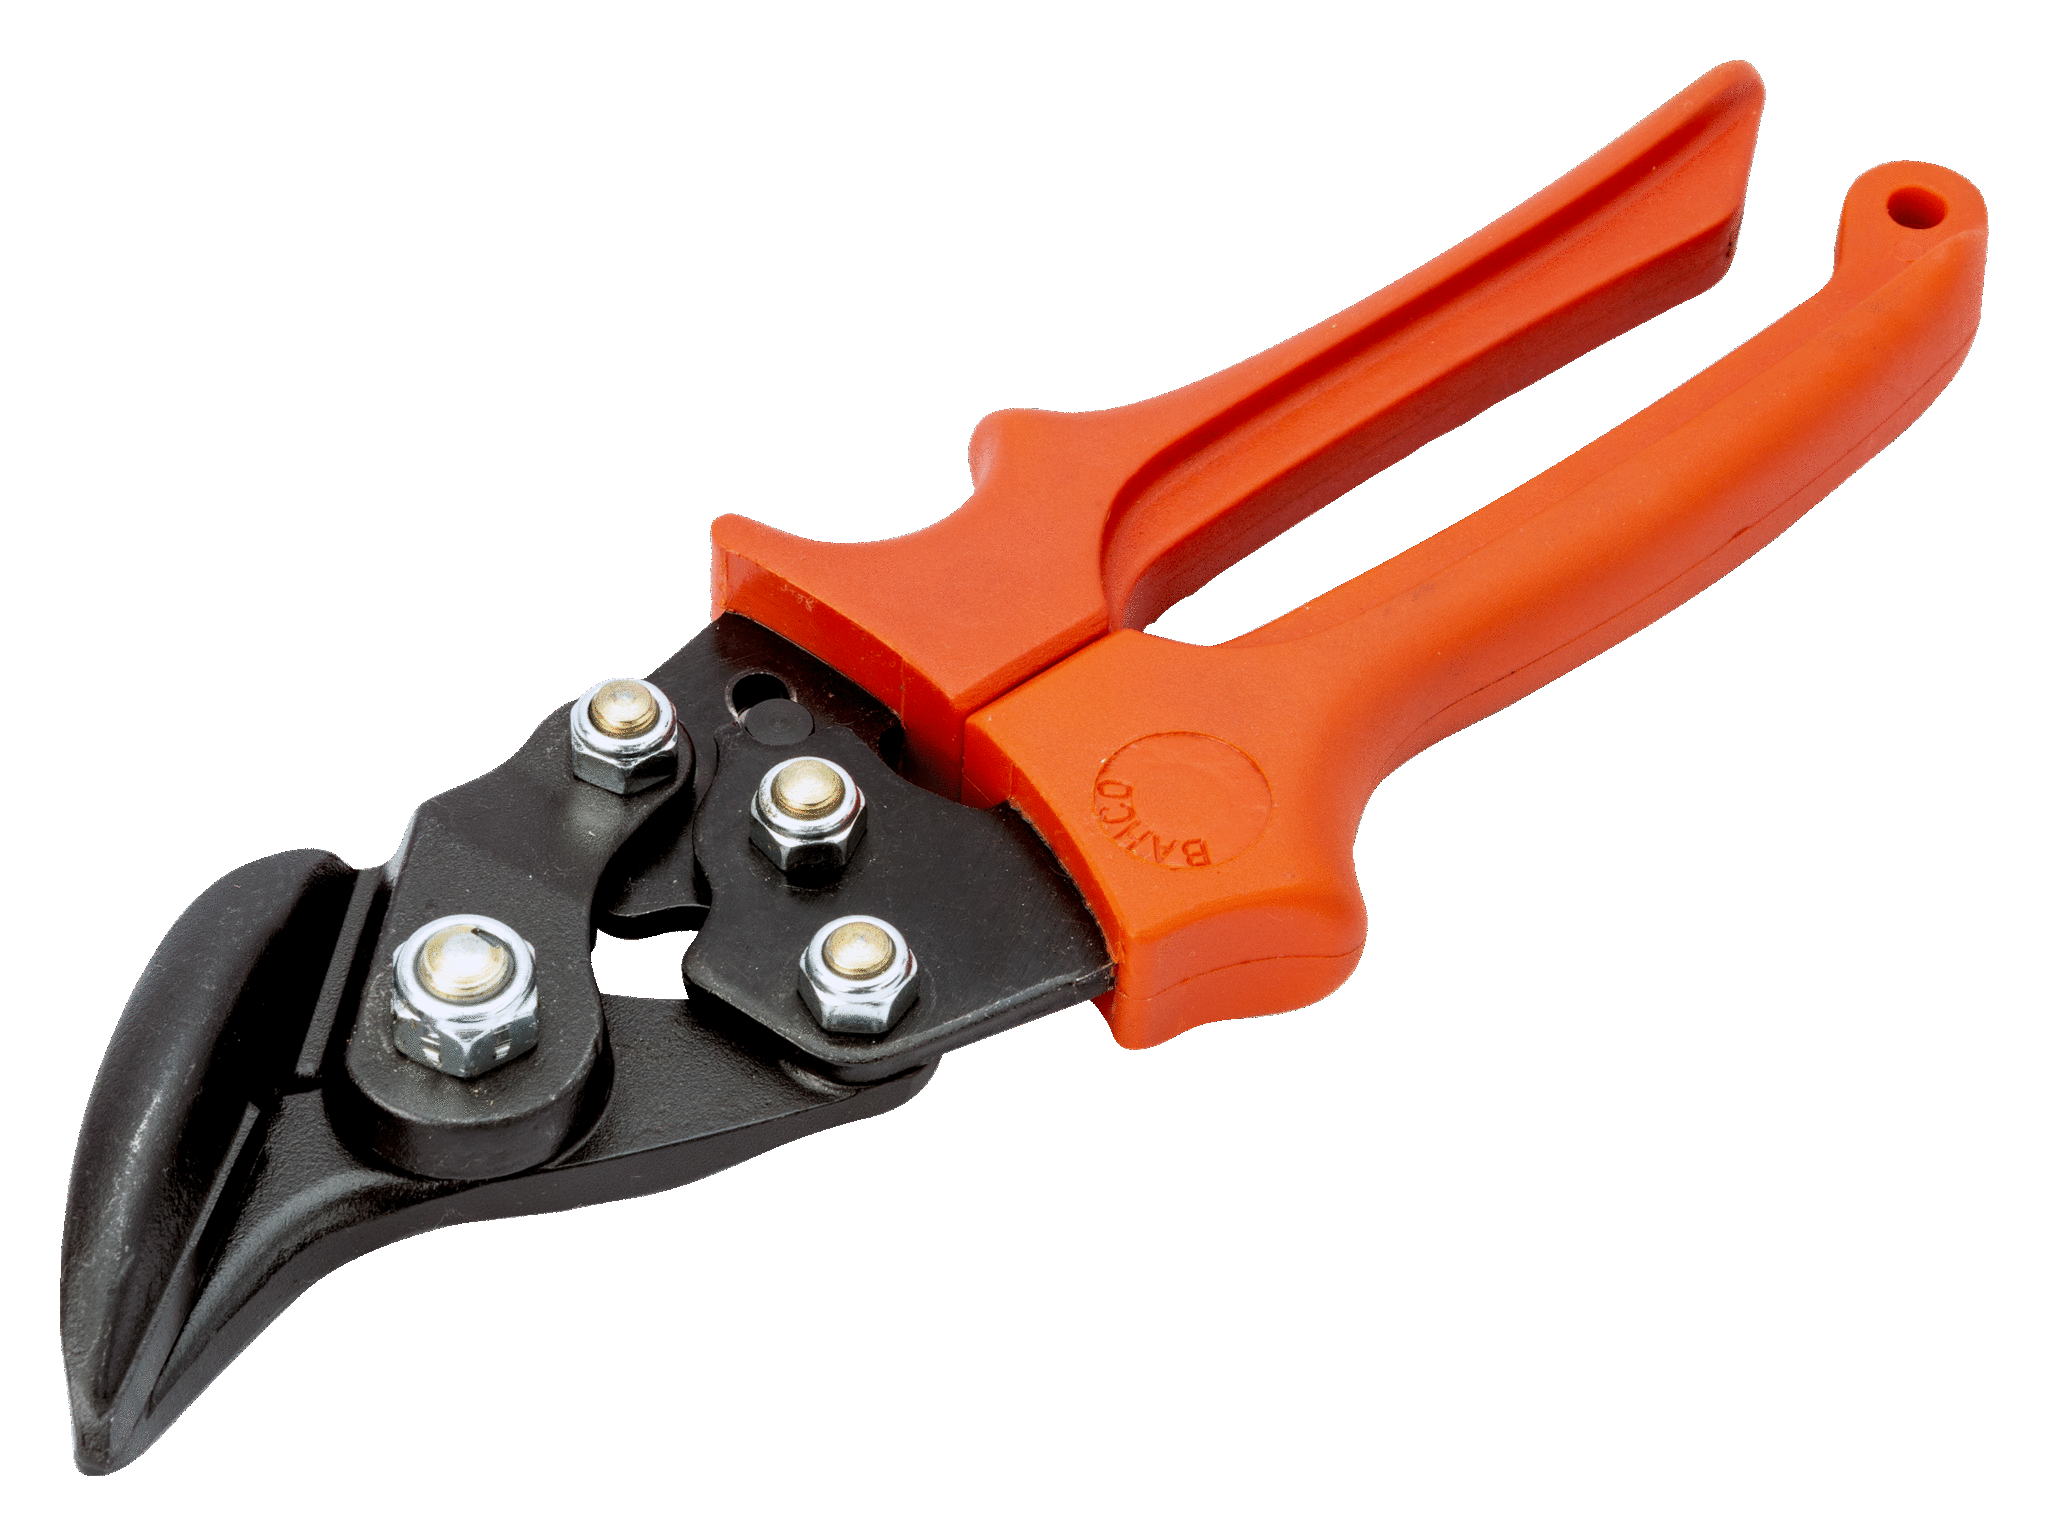 Straight Cut Pass-Through Metal Shears with Increased Power by